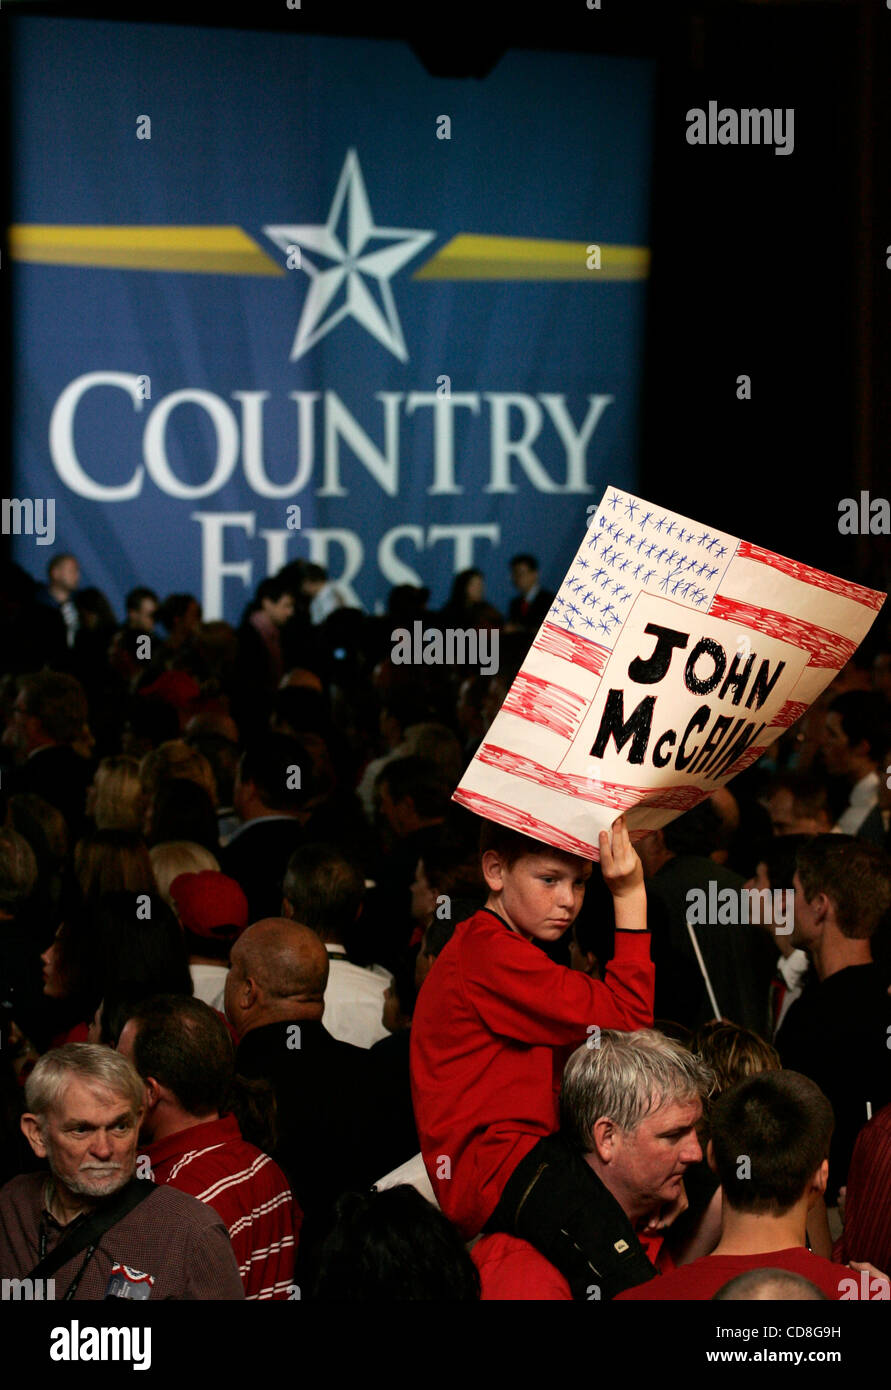 Nov 04, 2008 - Phoenix, Arizona, USA - A young and disappointed supporter of John McCain holds a sign on election night festivities at McCain headquarters on the grounds of the Biltmore Hotel in Phoenix on election day for the 2008 Presidential election. (Credit Image: © Jonathan Alcorn/ZUMA Press) Stock Photo